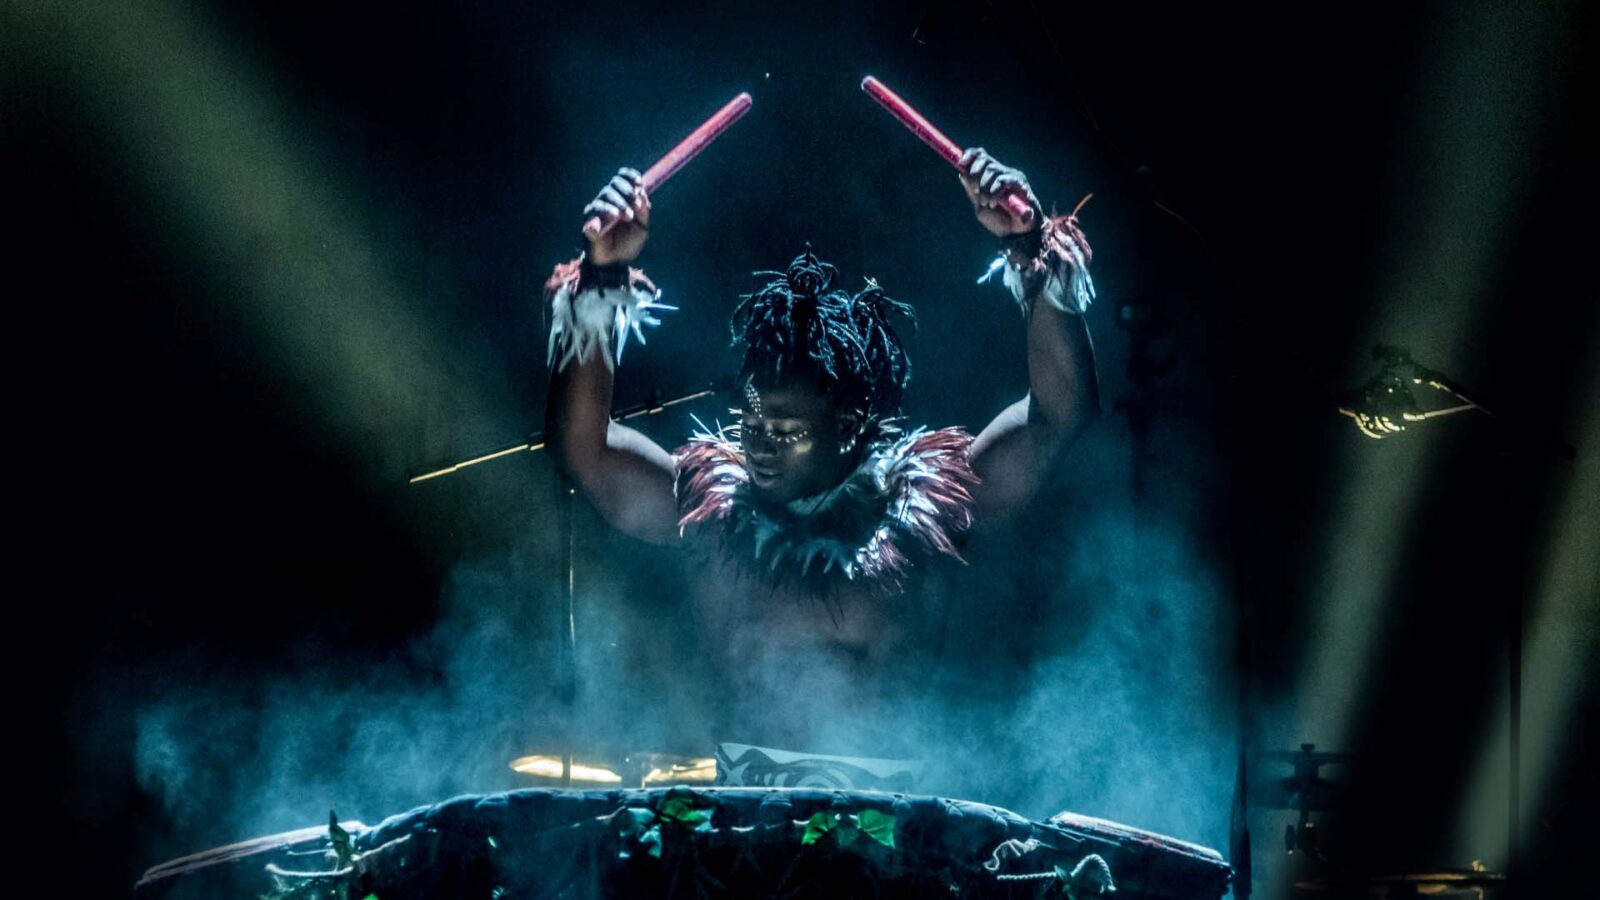 A drummer, illuminated dramatically on stage, is captured mid-performance. The drummer is shirtless, wearing decorative cuffs made of feathers around his wrists, and has intricate face paint. He holds two red drumsticks high above his head, poised to strike the large drum in front of him. The background is dark and misty, with beams of light cutting through the haze, adding to the intense and dynamic atmosphere of the scene.